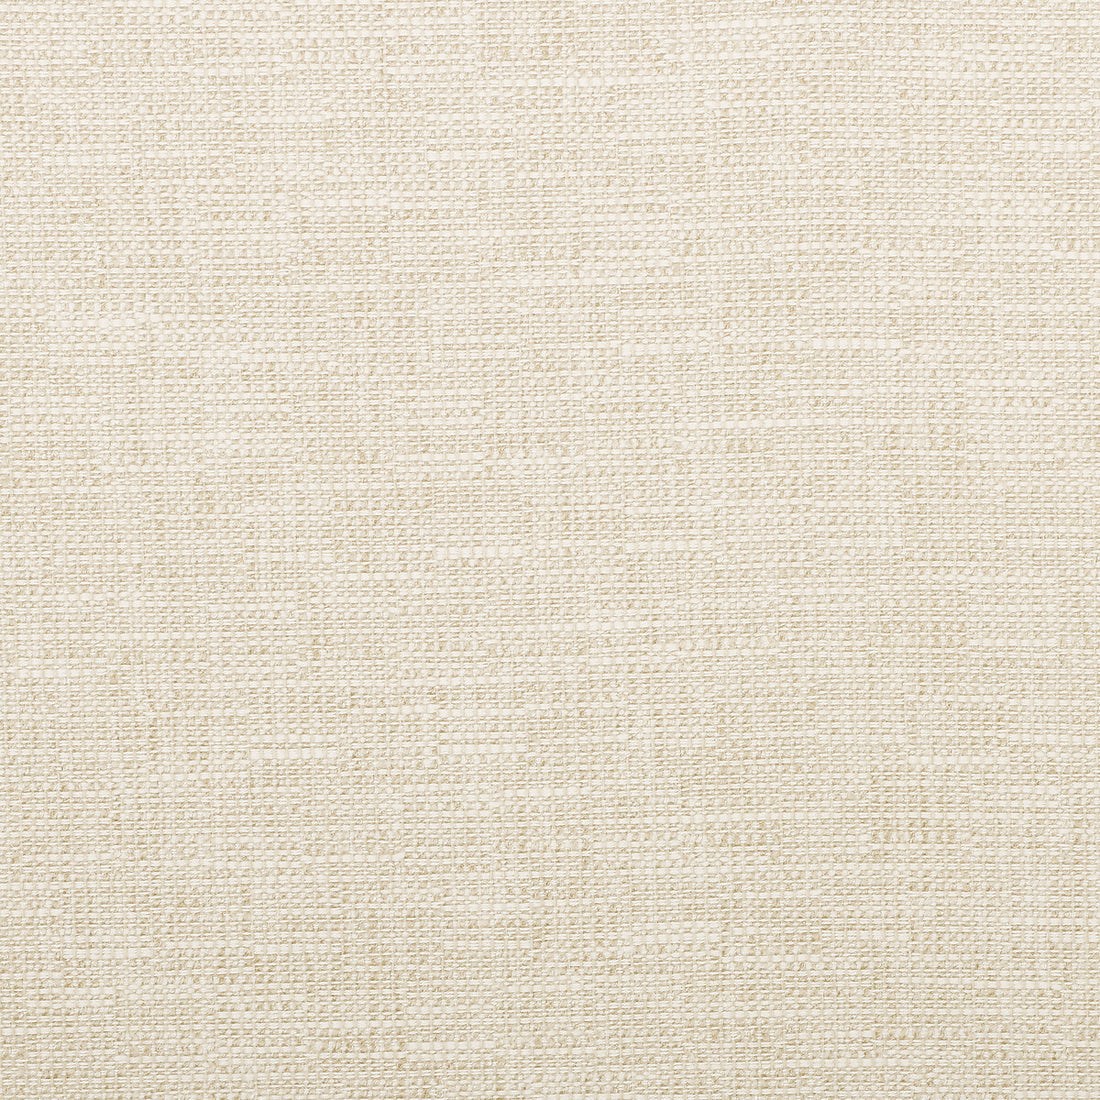 Kravet Smart fabric in 35518-1116 color - pattern 35518.1116.0 - by Kravet Smart in the Inside Out Performance Fabrics collection